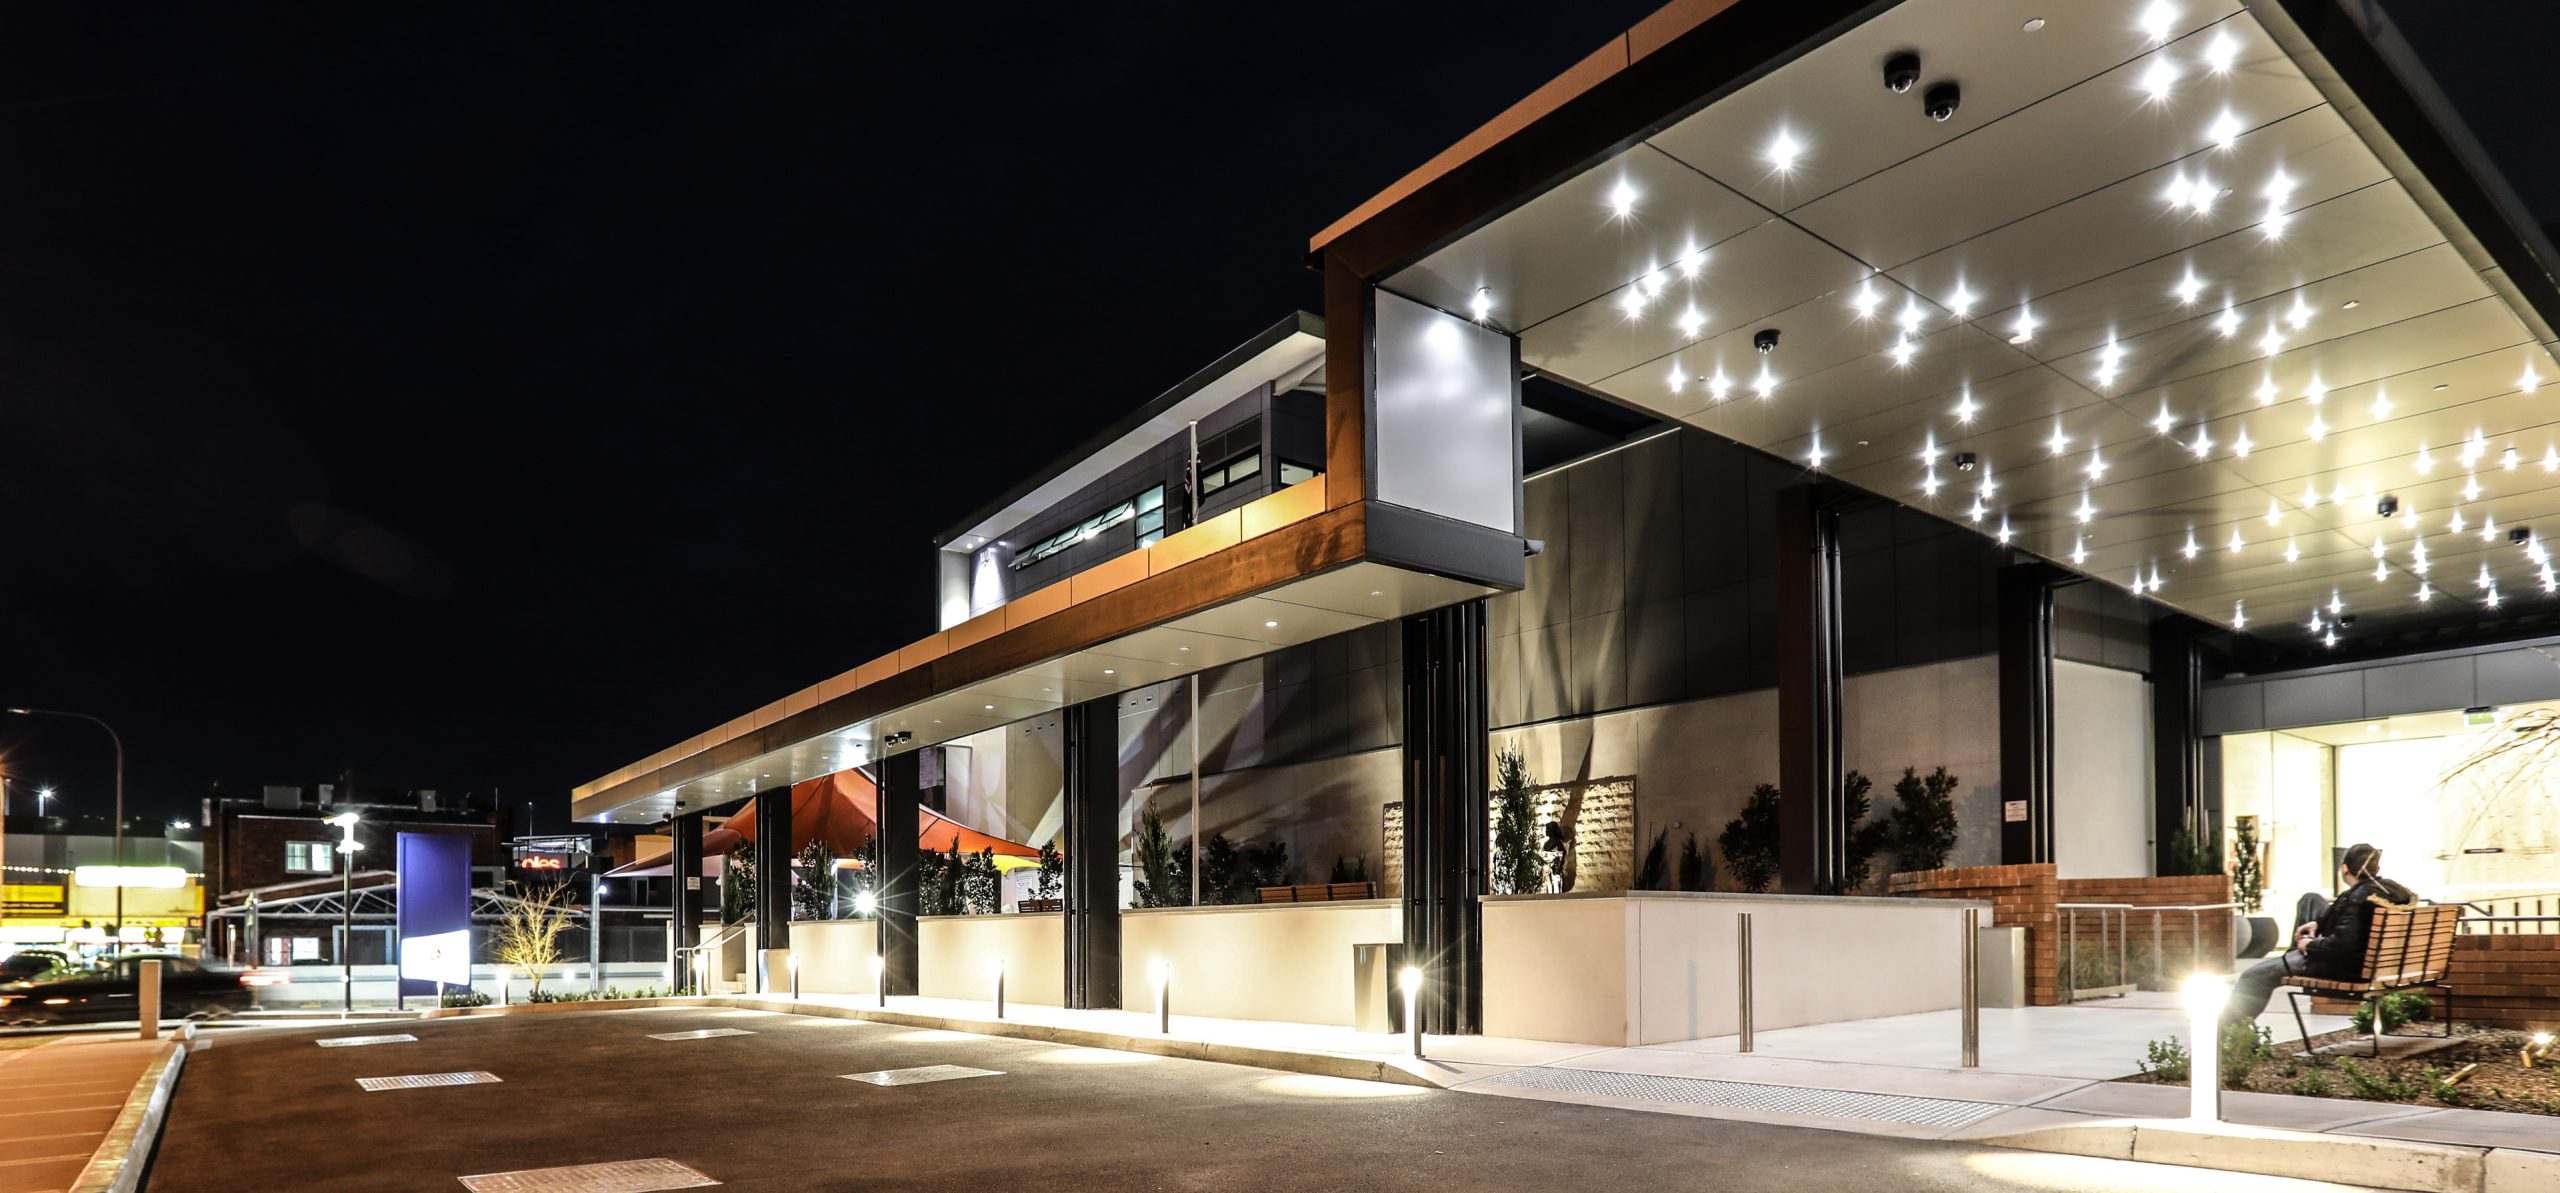 2 club exterior entry merrylands rsl club taylor construction hospitality fitout